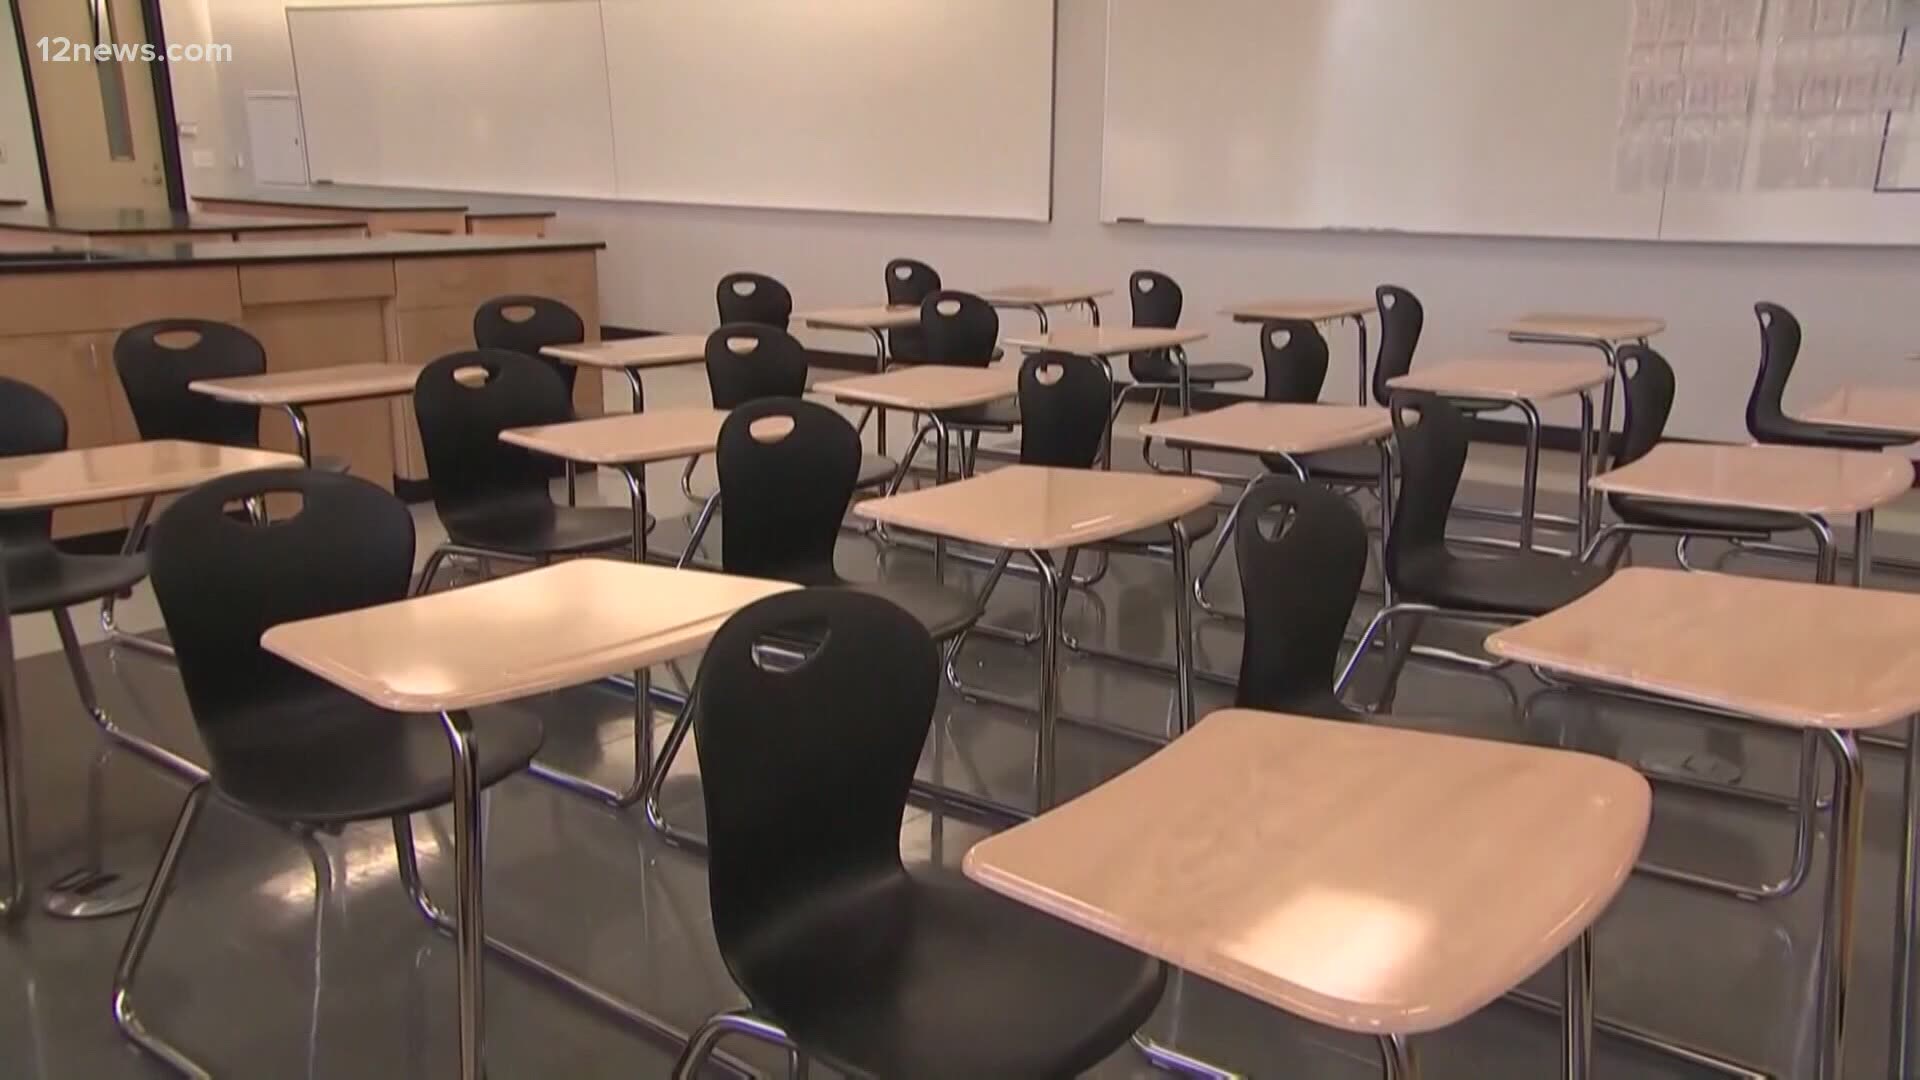 The Queen Creek School District approved a plan that would allow students to go back to the classroom. Some teachers are worried about the decision.